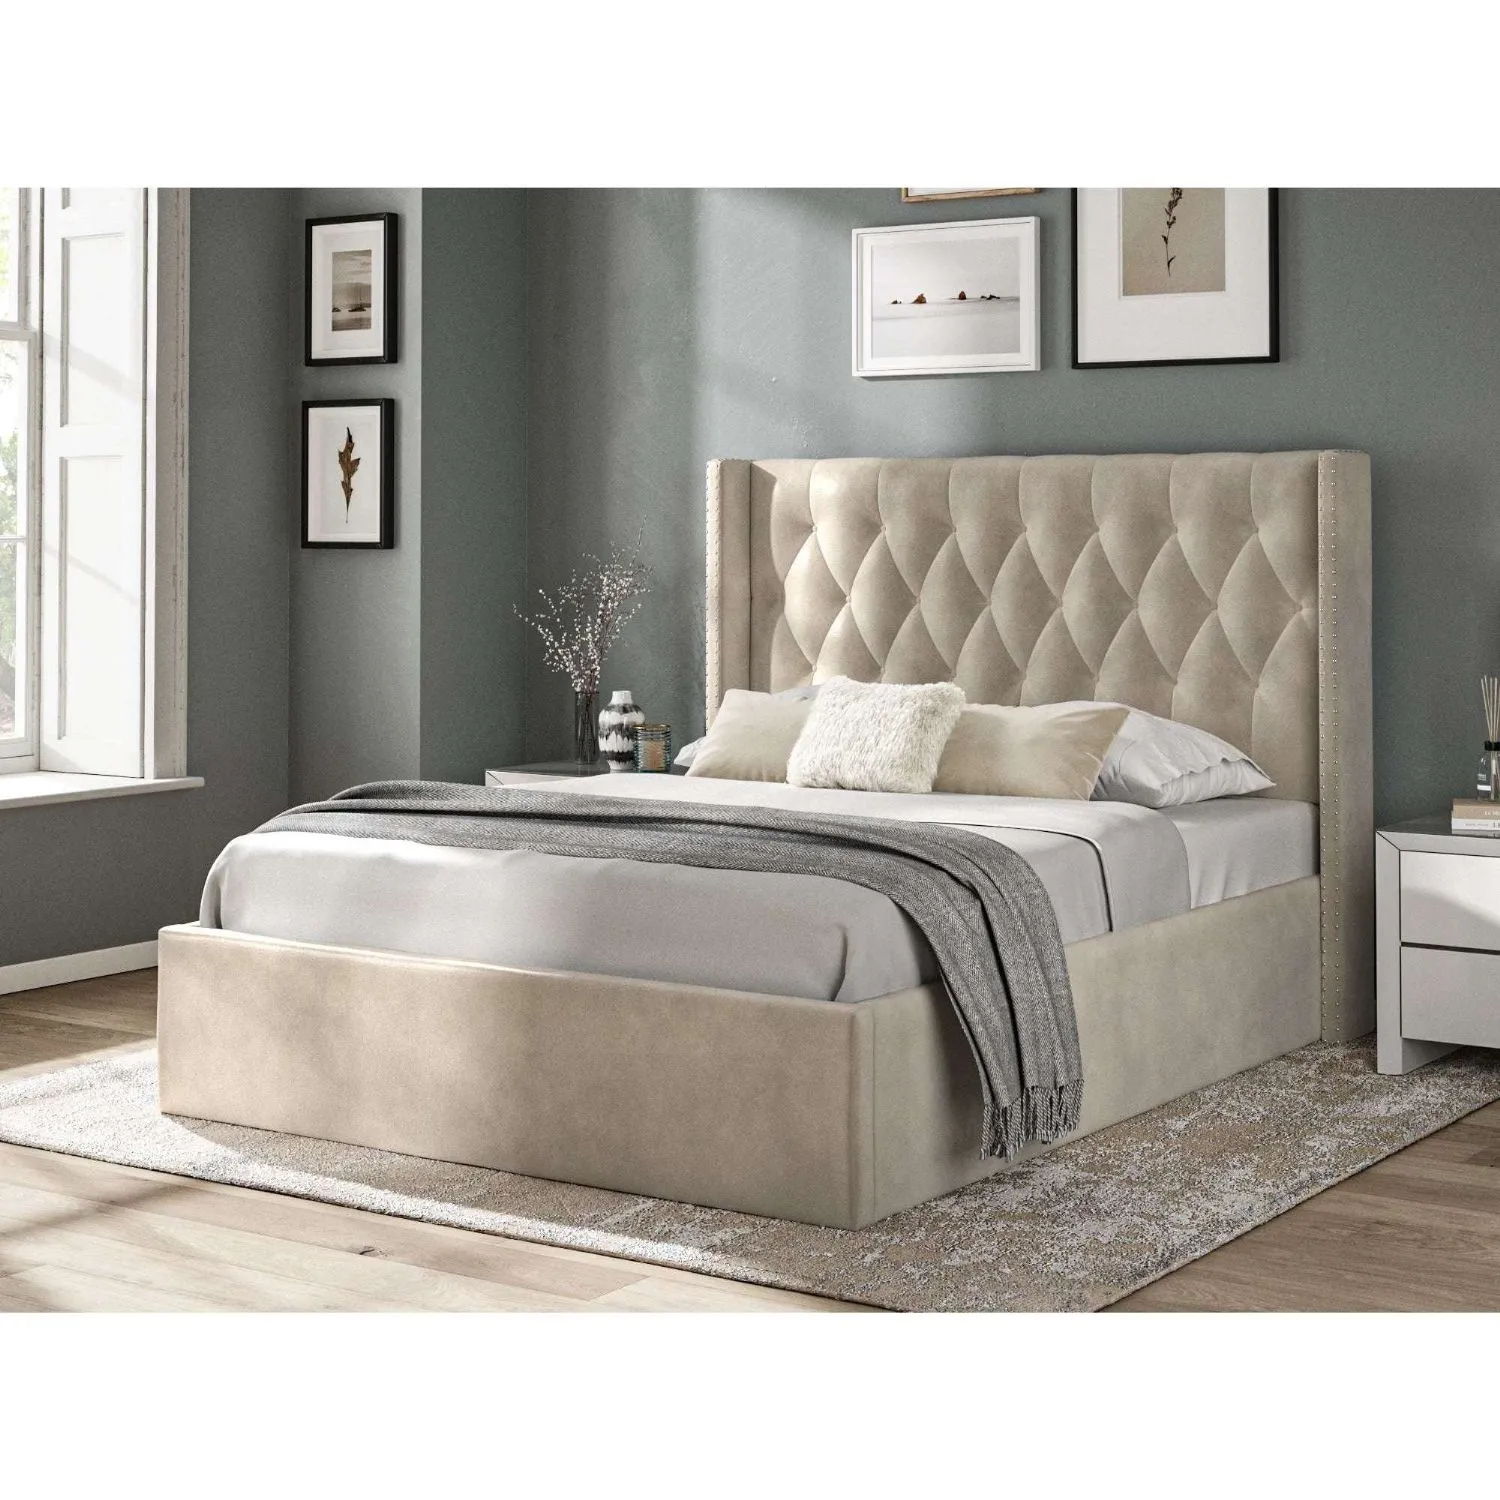 Fabric Bed Collection Beige 5